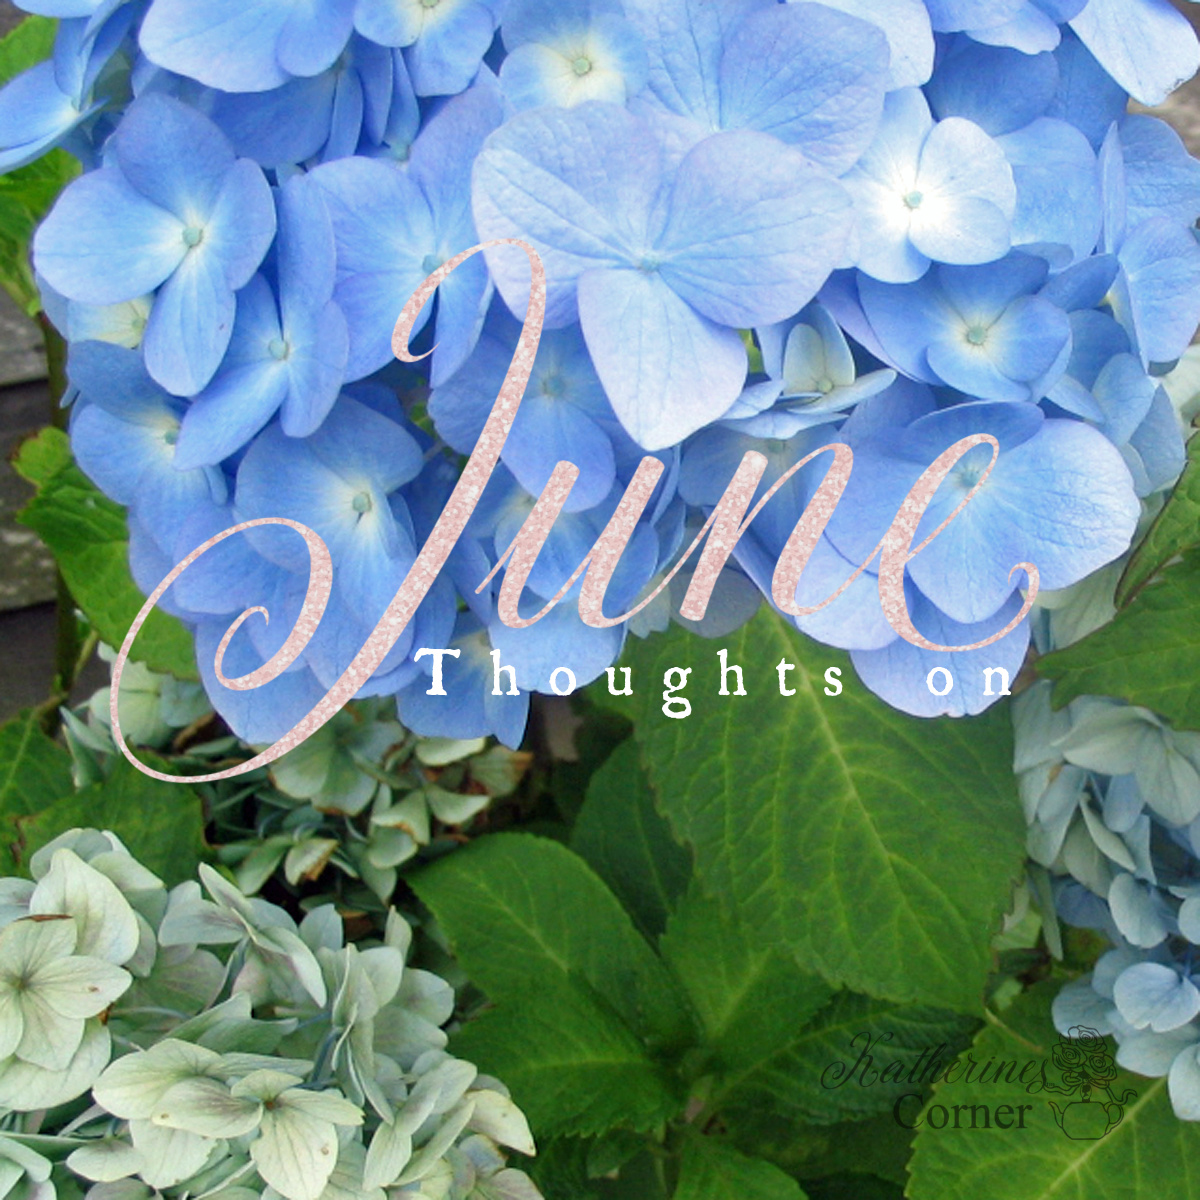 Thoughts on June